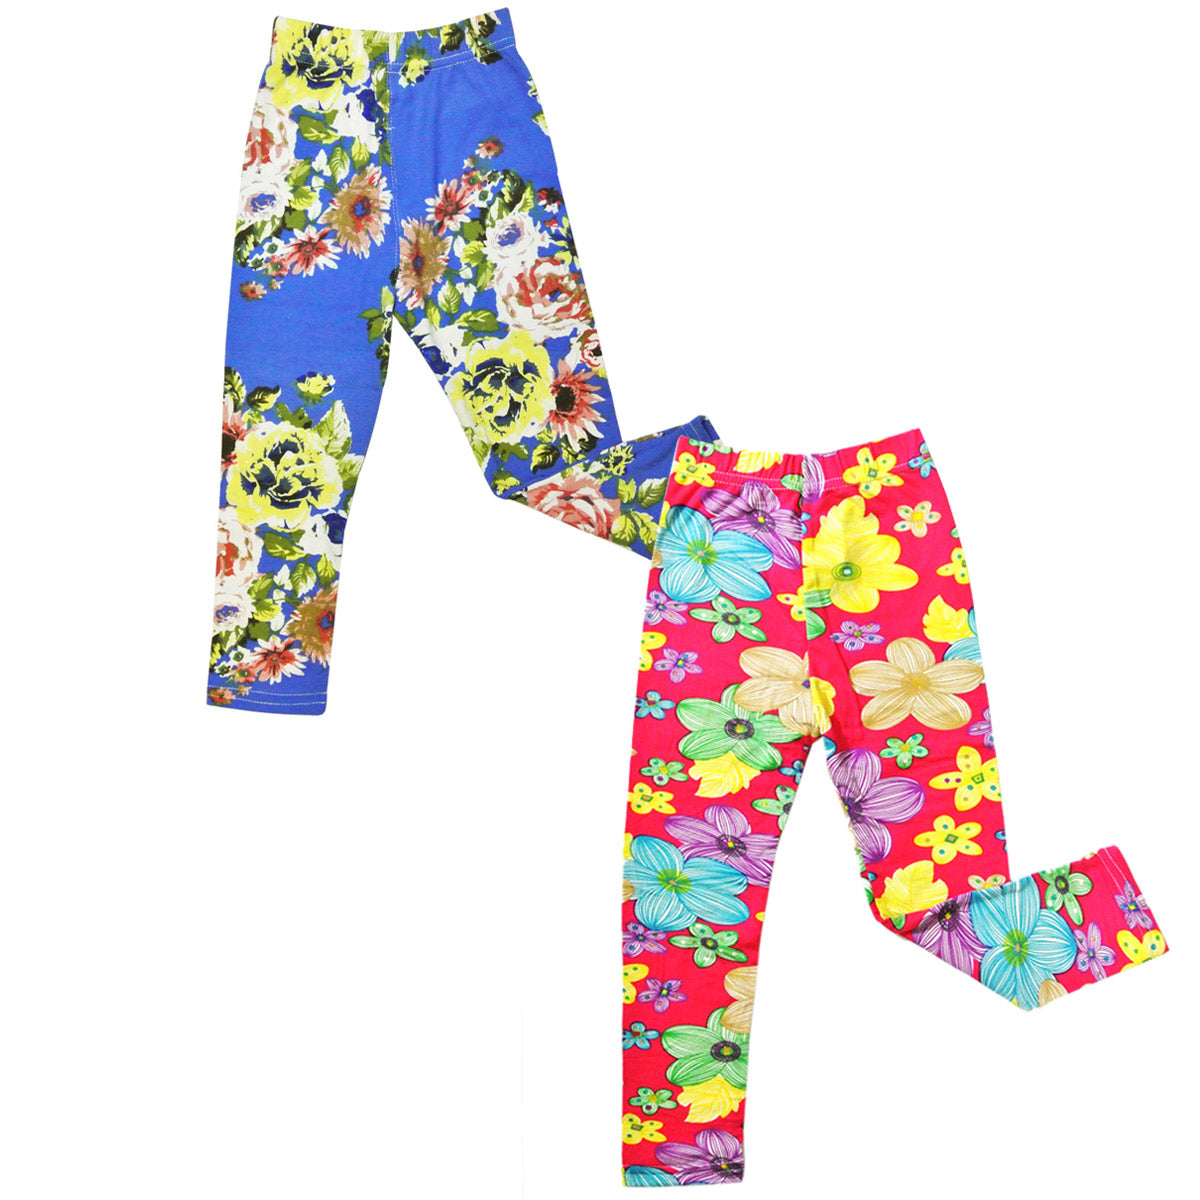 Wrapables Doodle and Floral Print Toddler Leggings Set of 2, White (Size 5)